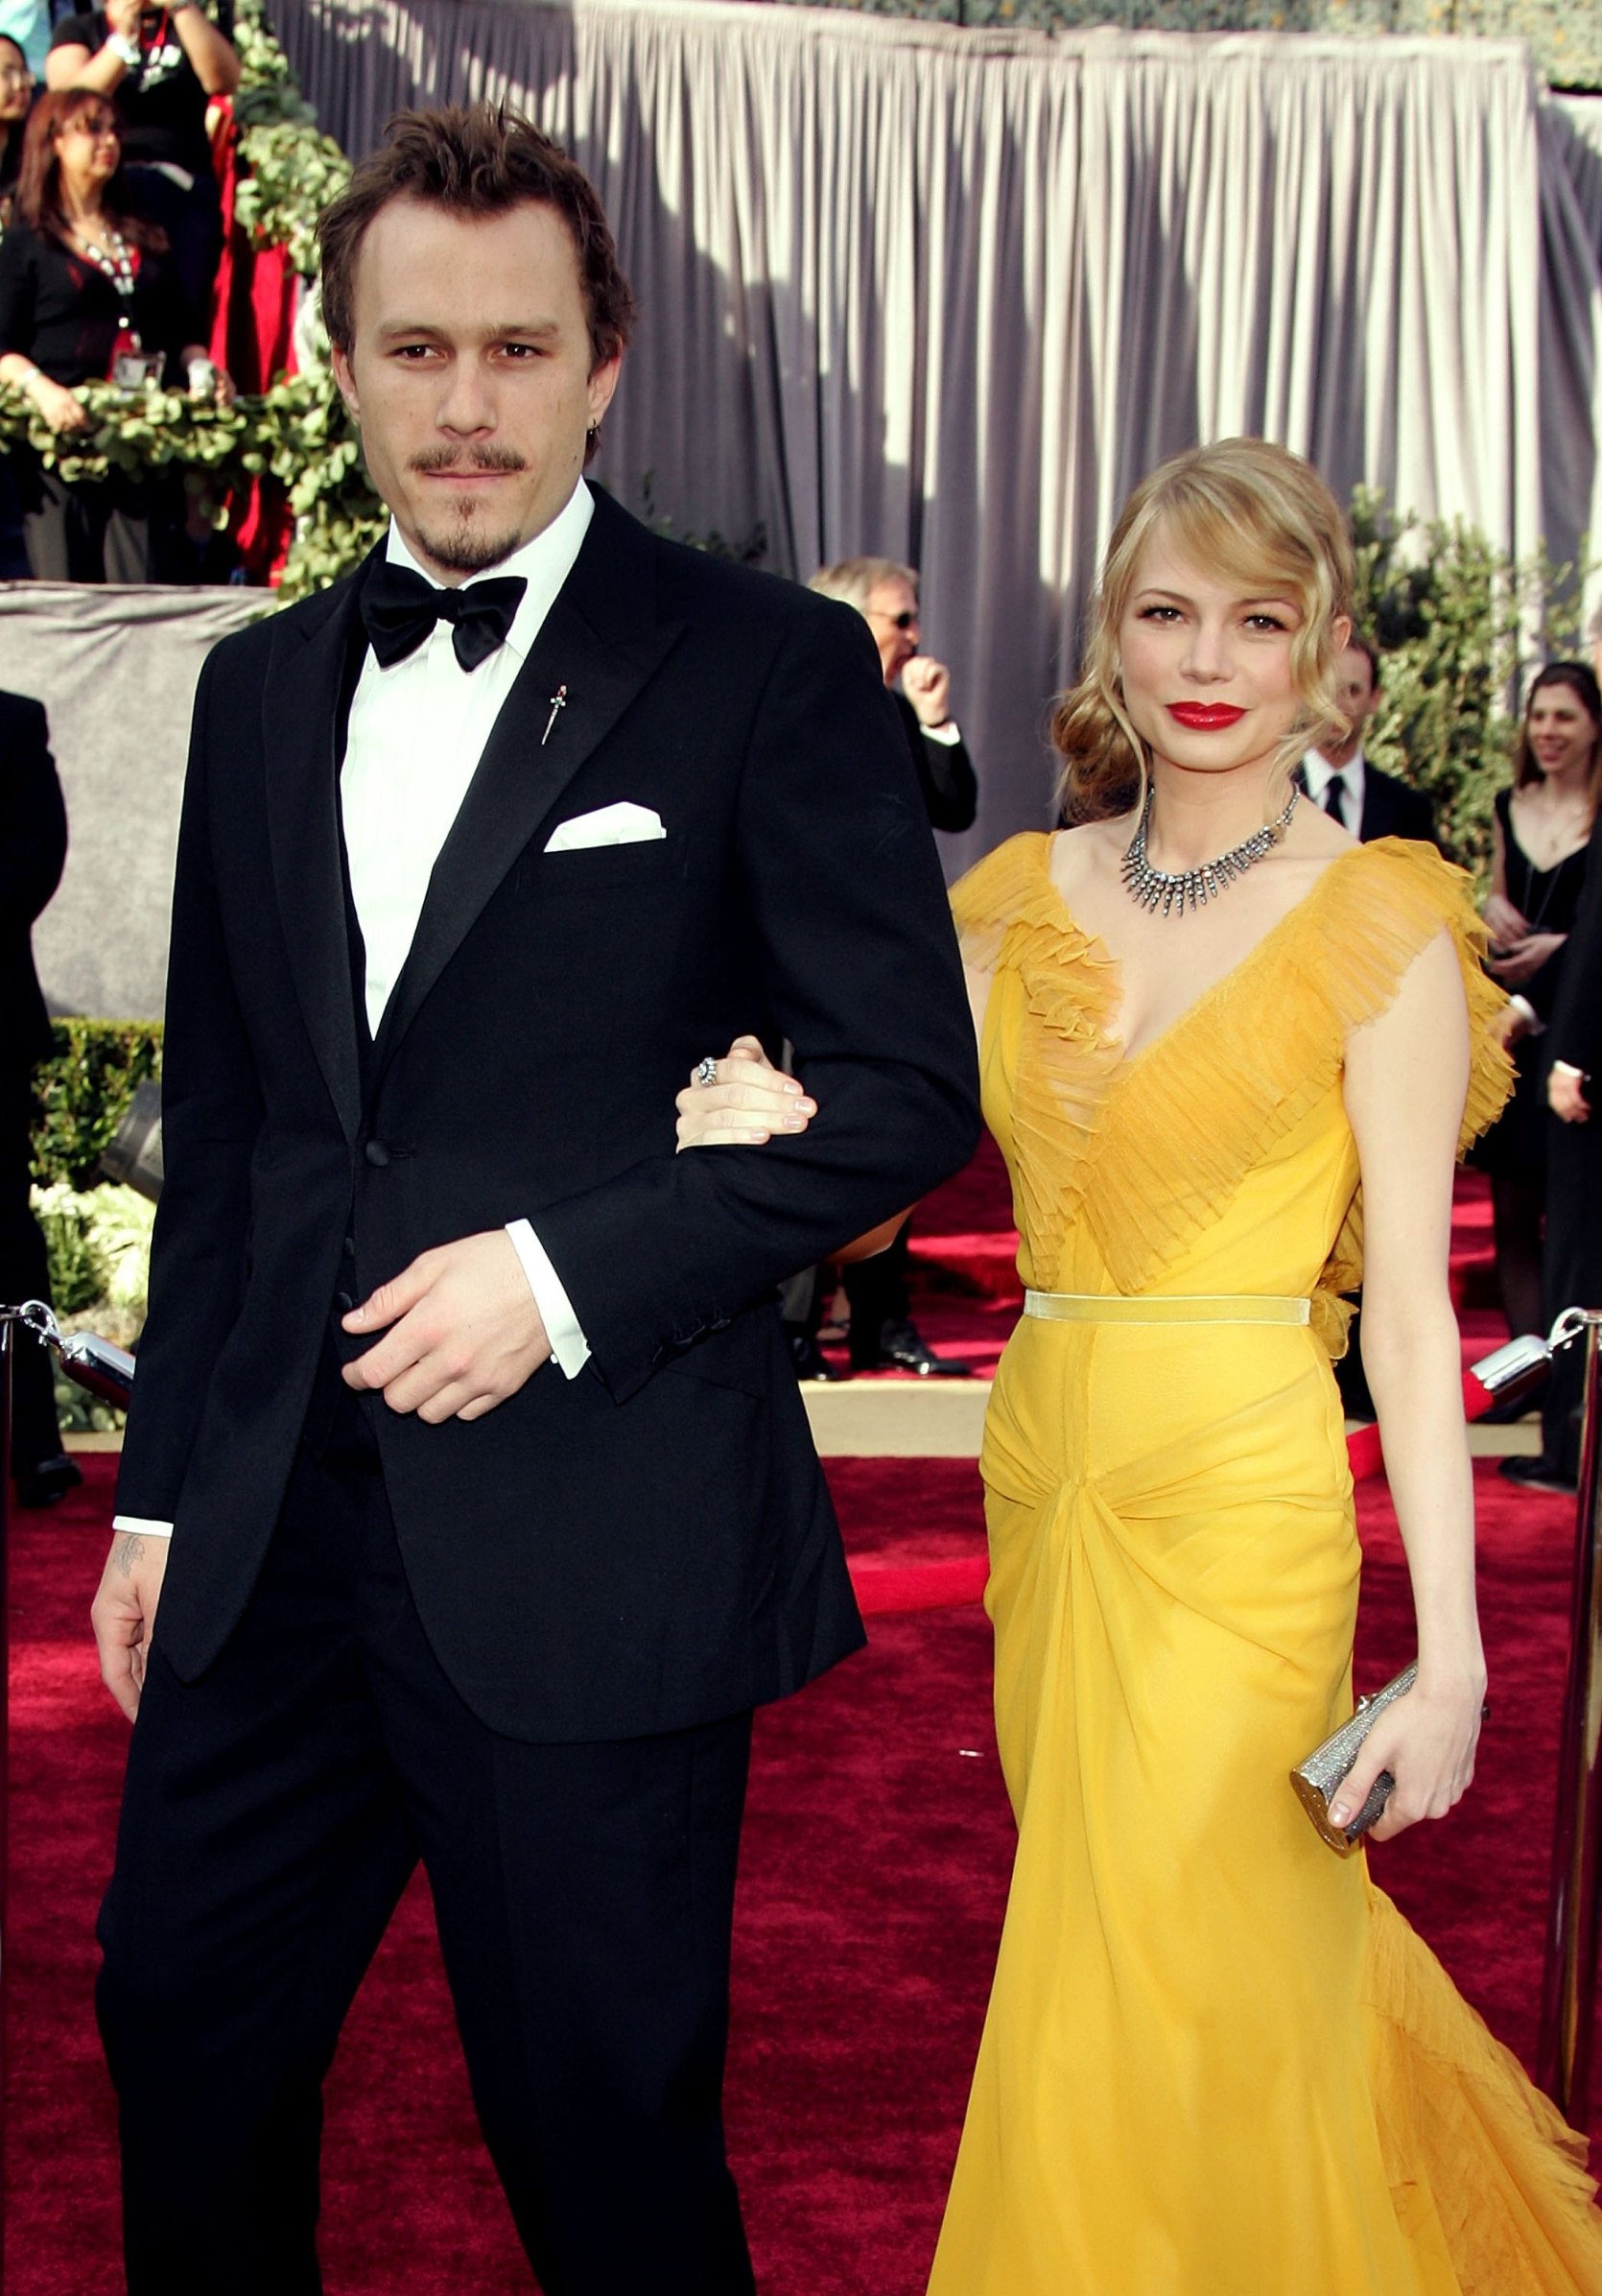 HOLLYWOOD - MARCH 05:  Actors Heath Ledger and Michelle Williams arrive to the 78th Annual Academy Awards at the Kodak Theatre on March 5, 2006 in Hollywood, California.  (Photo by Frazer Harrison/Getty Images)